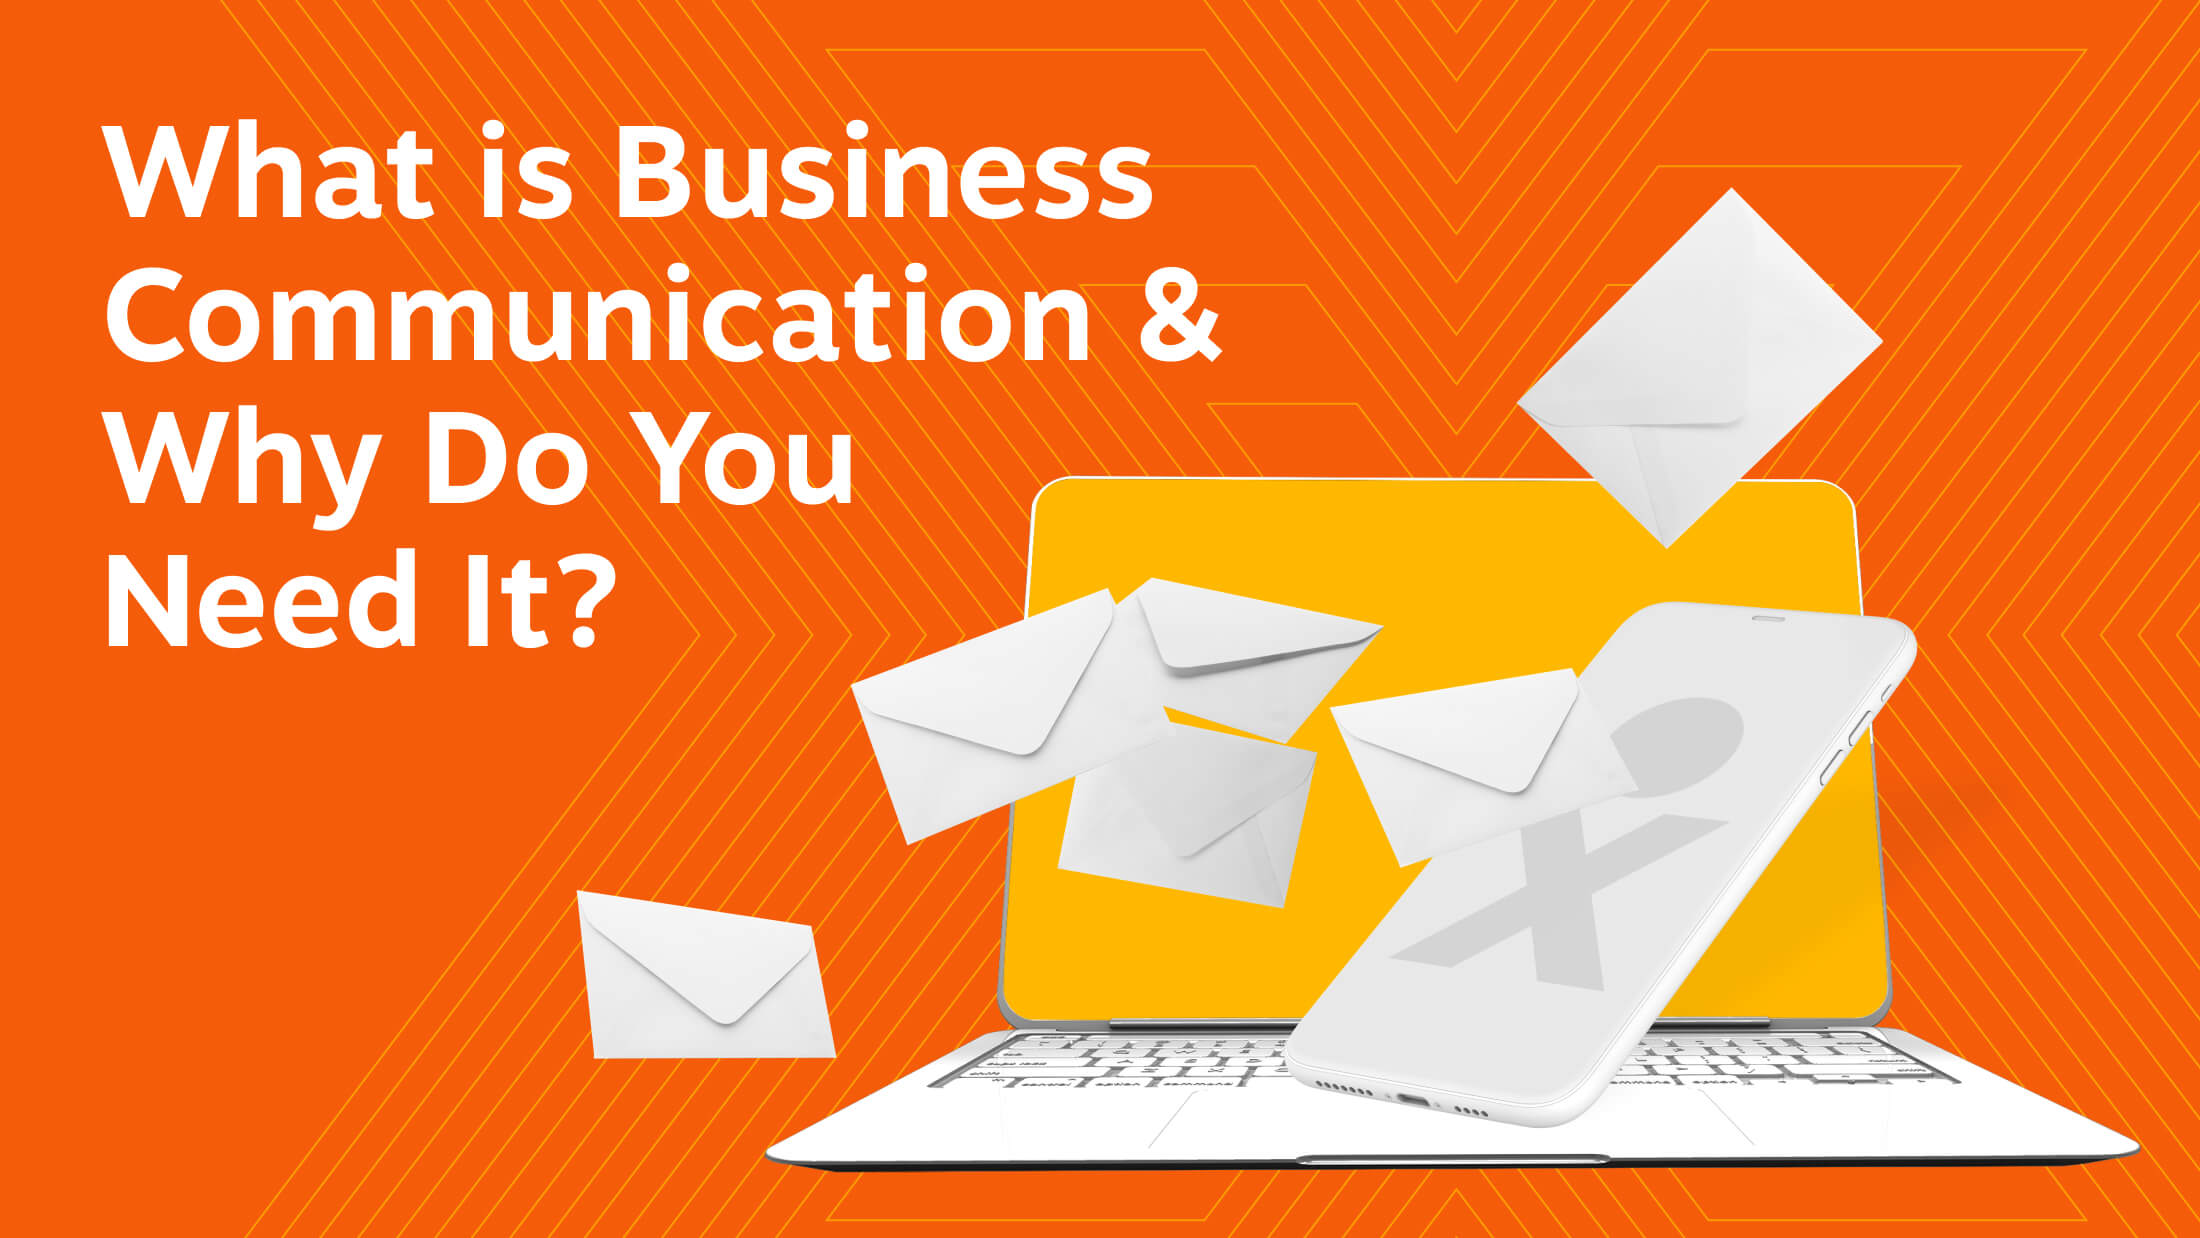 Channels of Business Communication